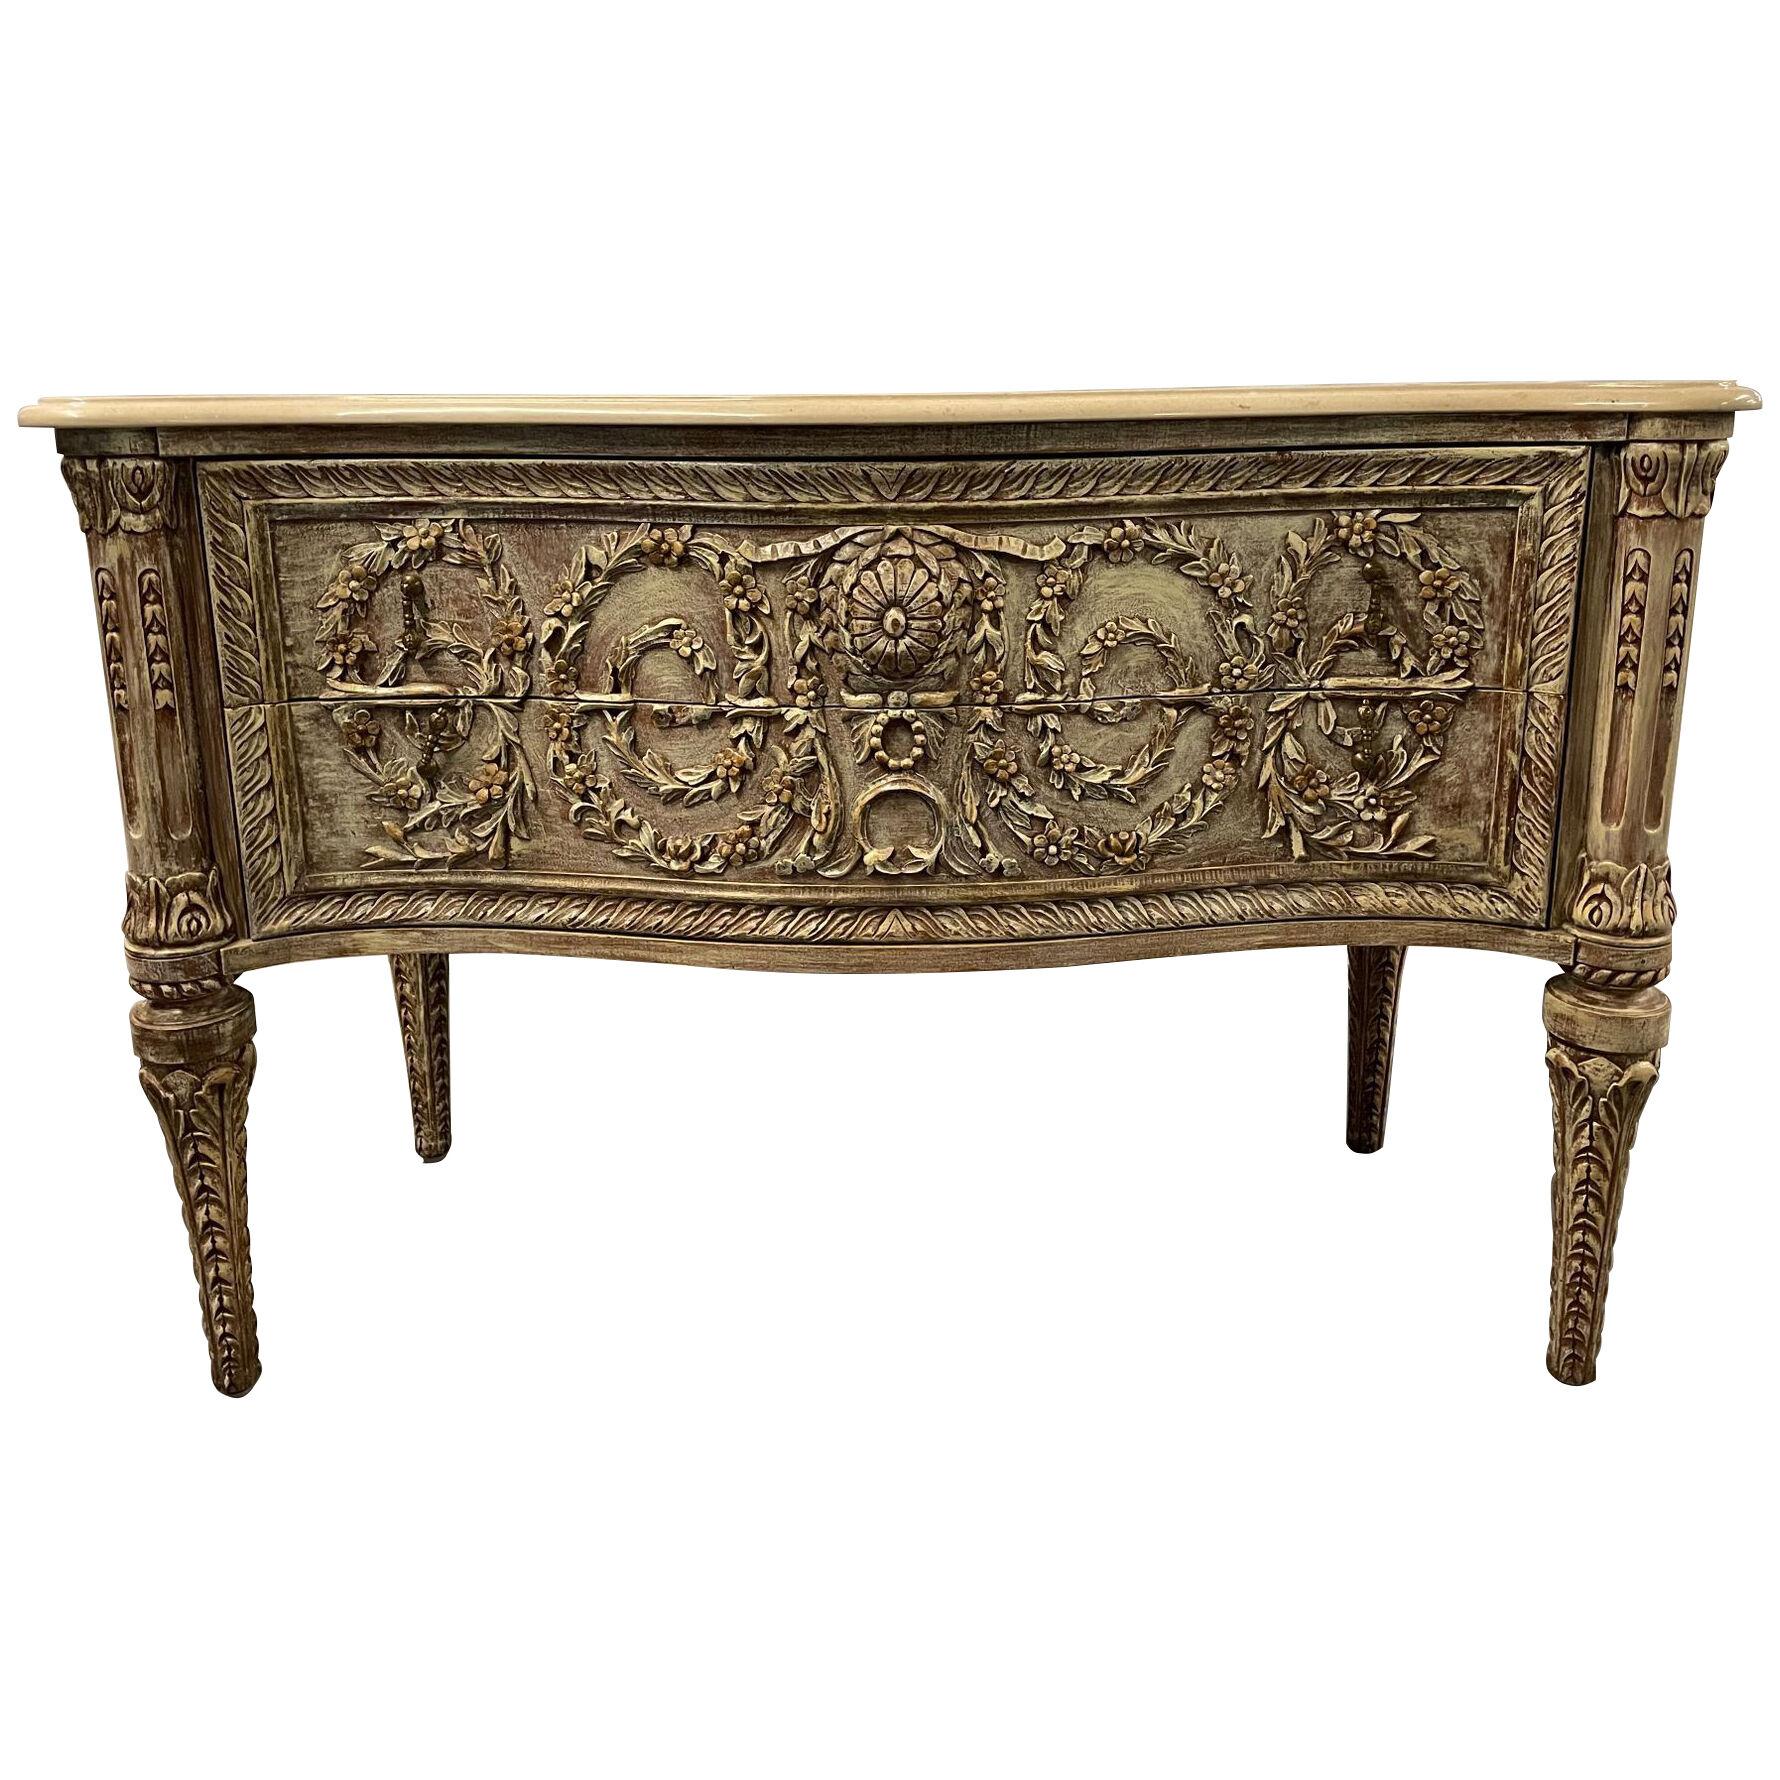 A Rococo Style Commode, Chest, Dresser with a Marble Top, Carved